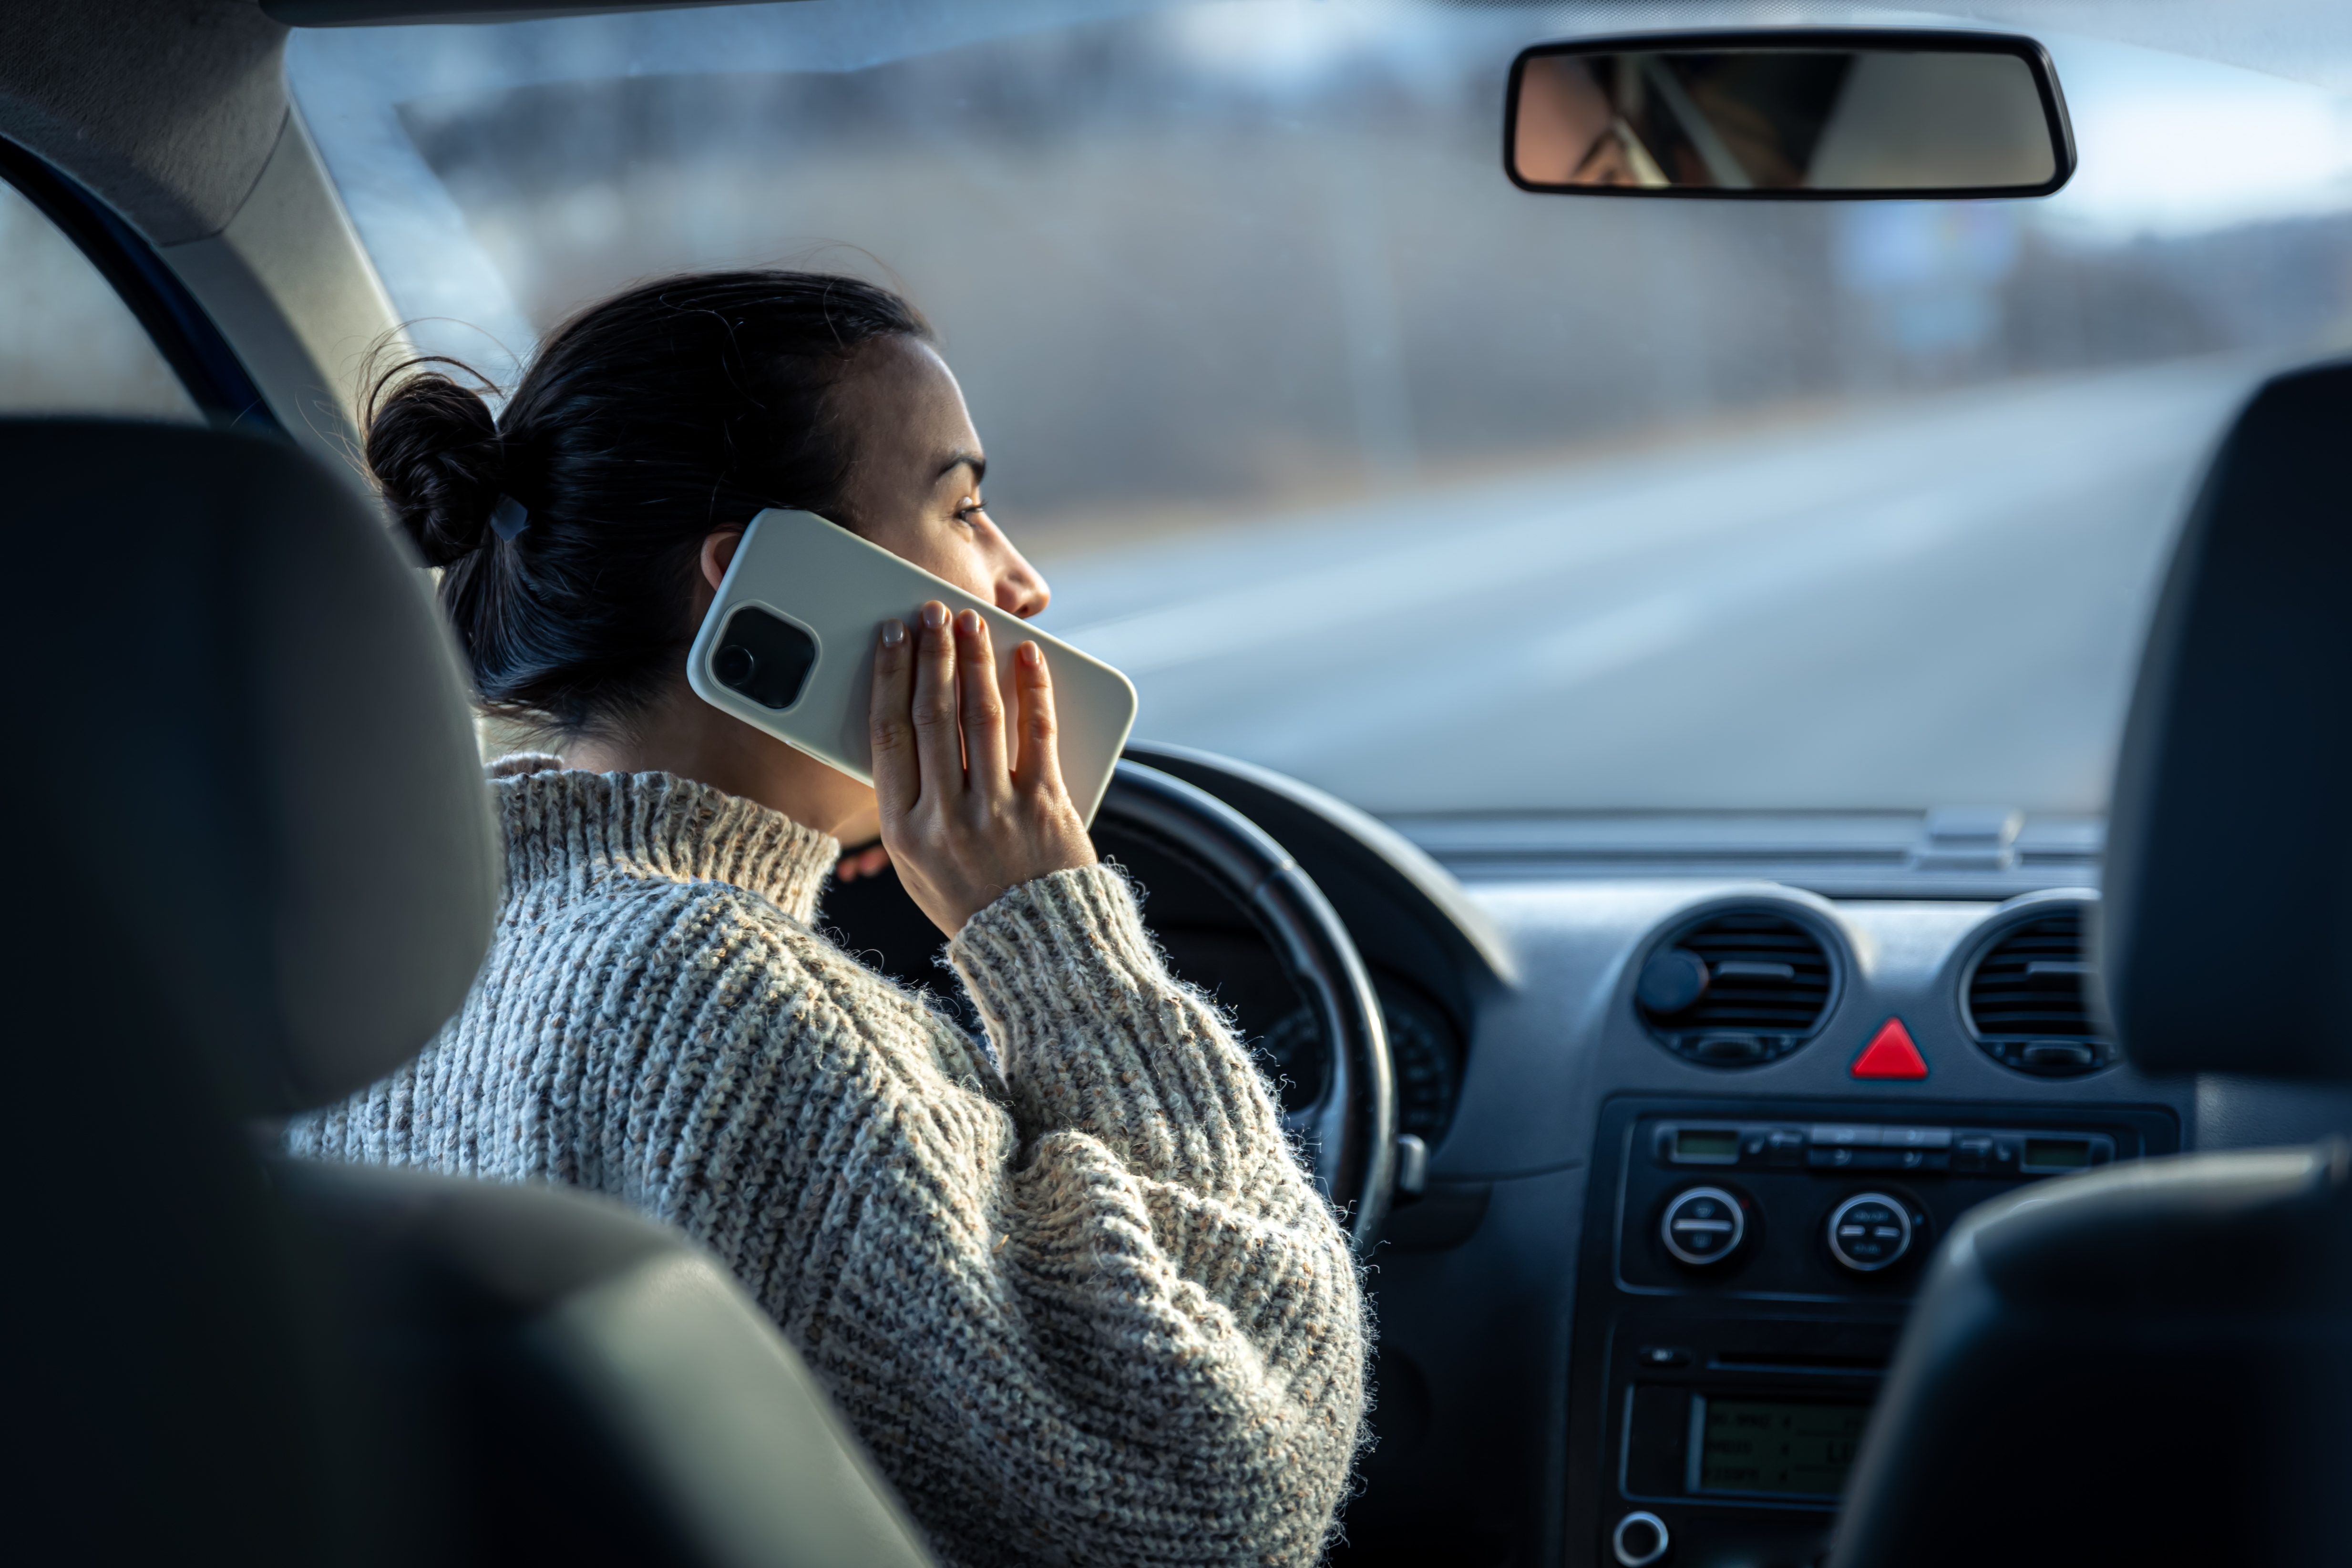 A woman talking on her phone in a car | Source: Shutterstock